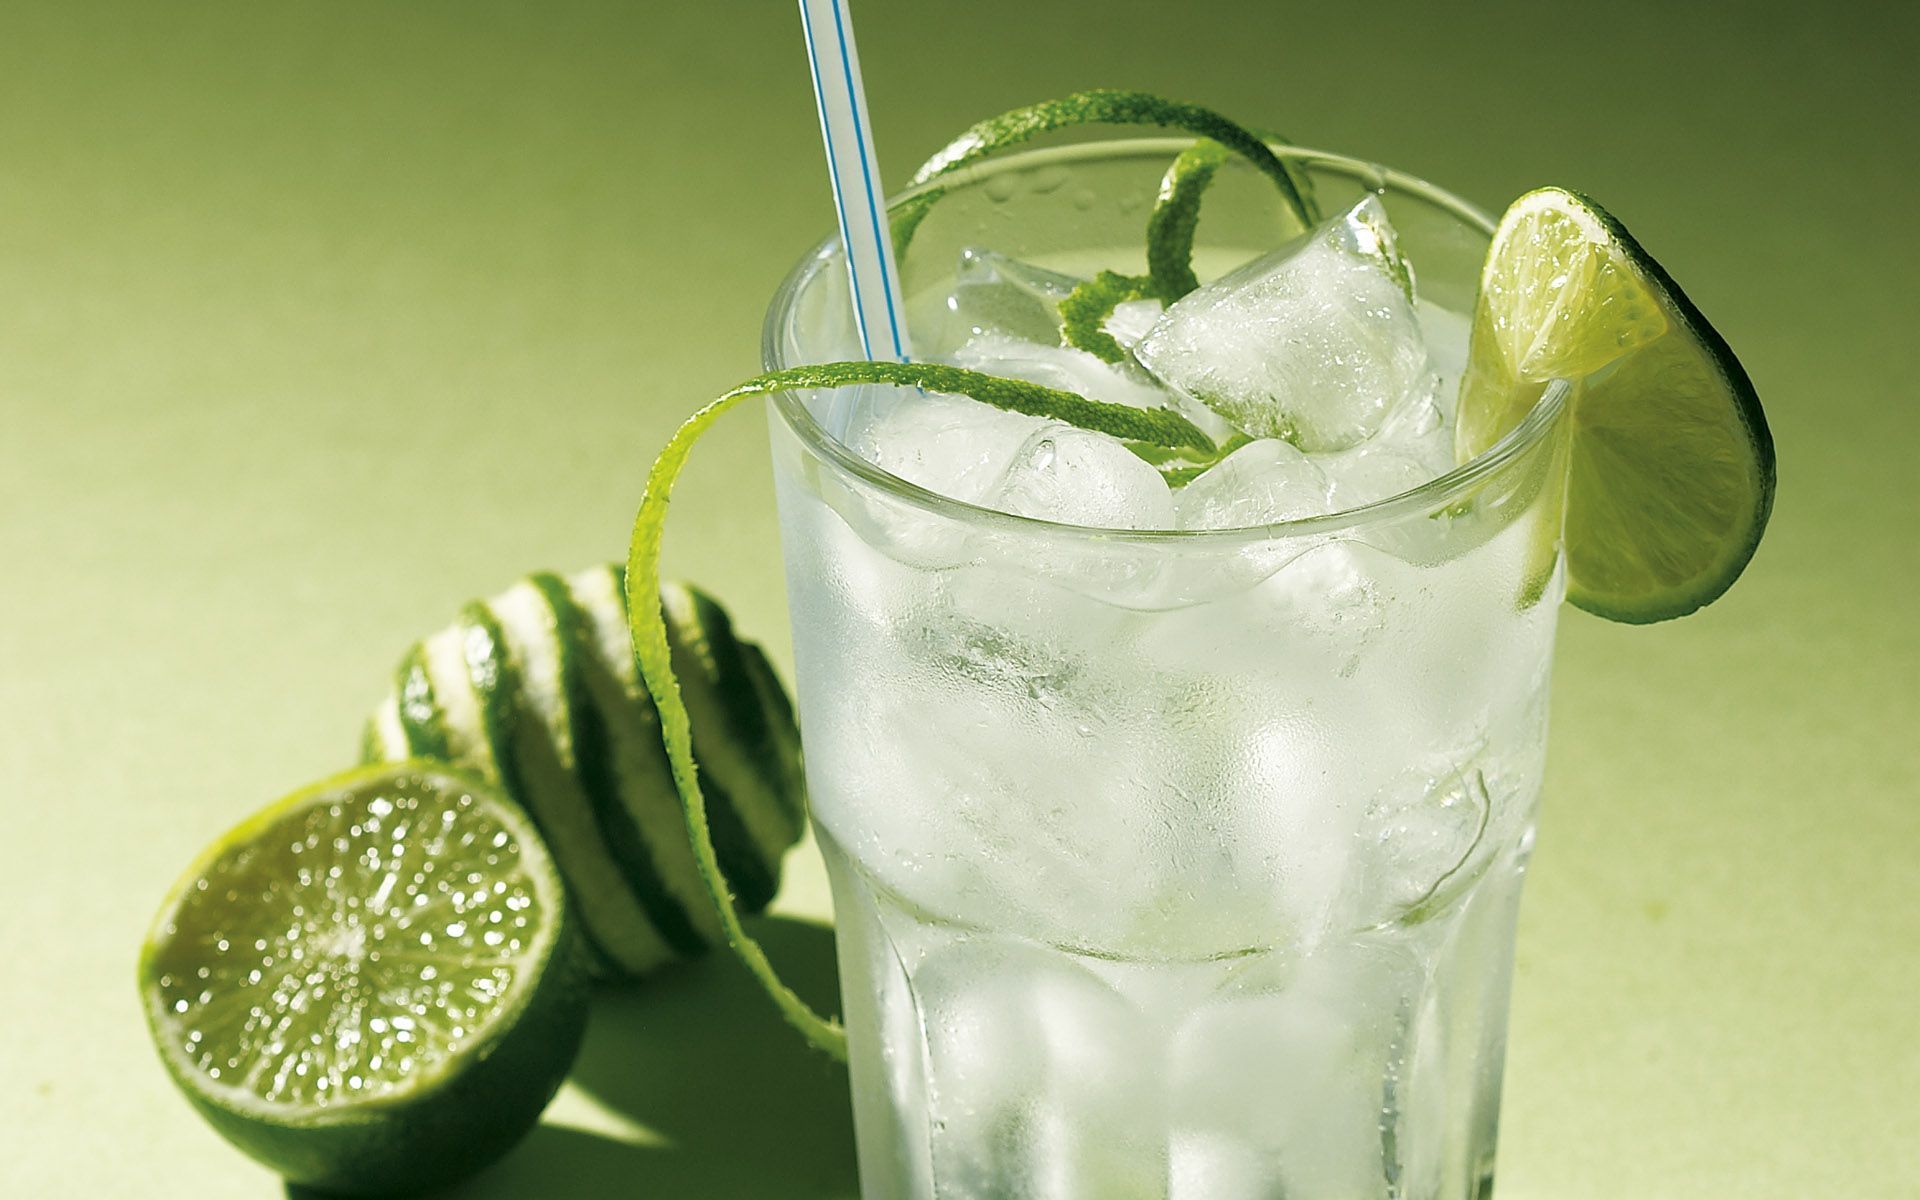 Soft drink. Low calorie alcoholic drinks, Fresh drinks, Alcoholic drinks